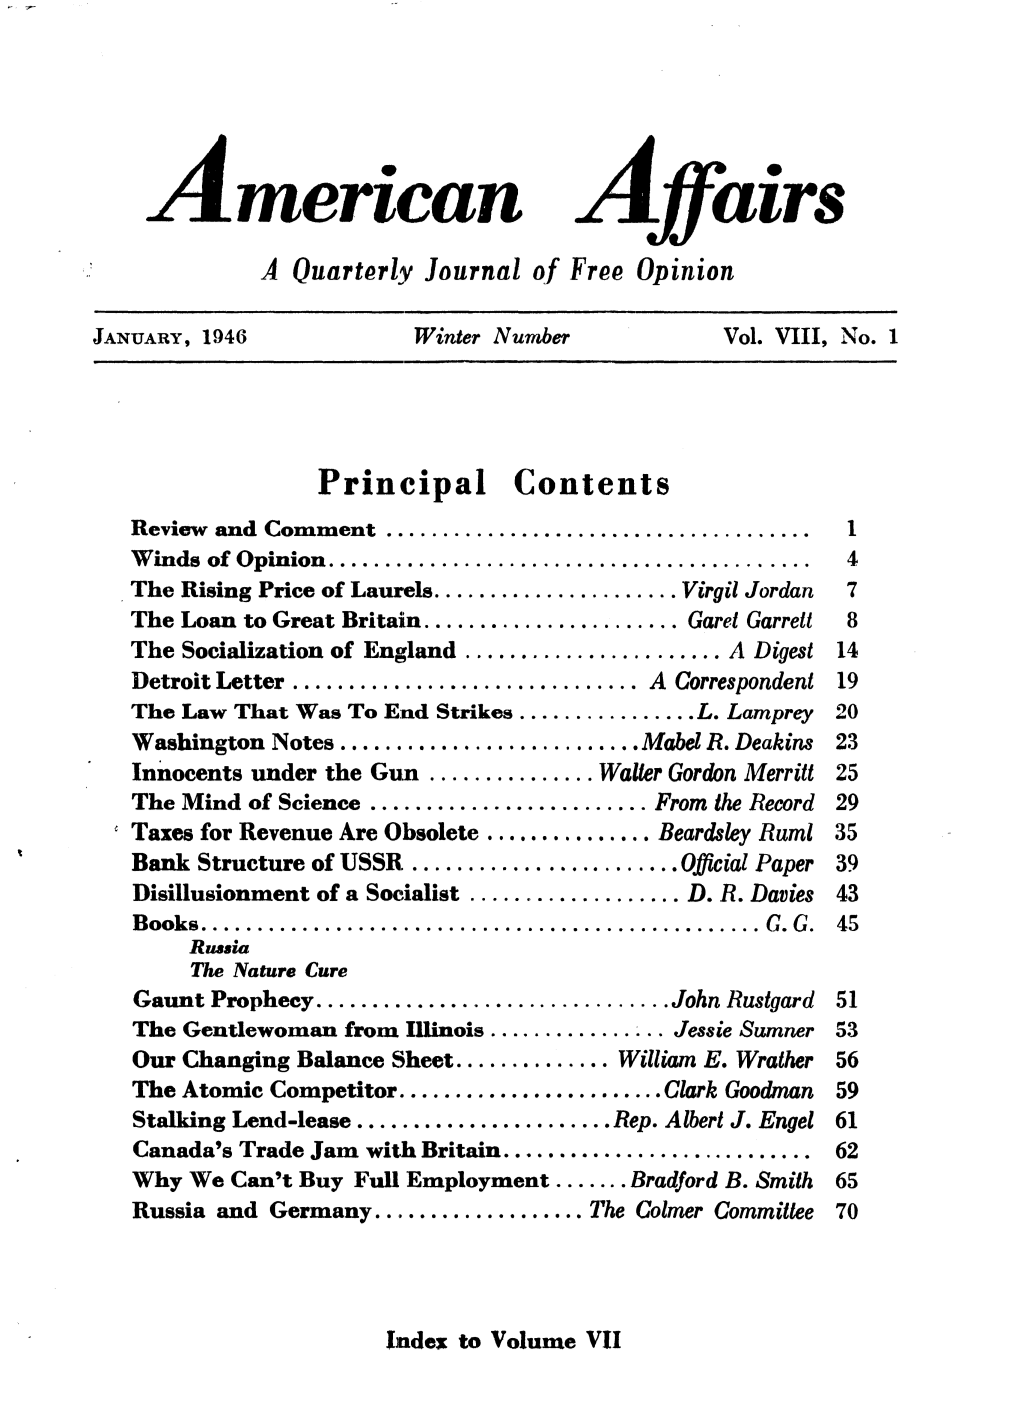 American Affairs Is a Quarterly Journal of Thought and Opinion